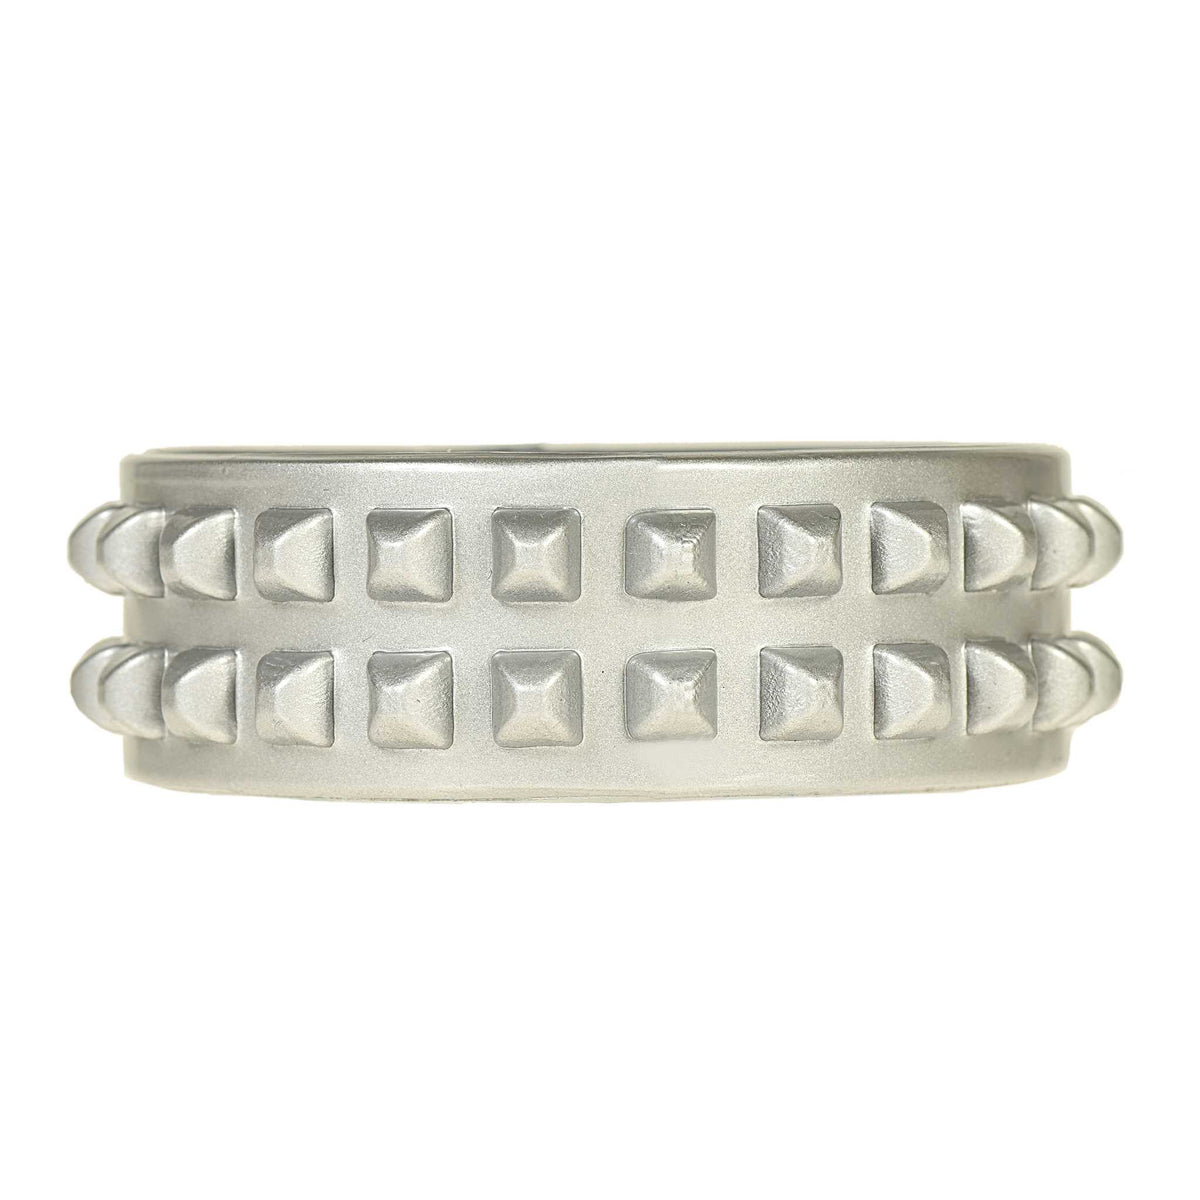 Silver stackable bracelets for women with studs